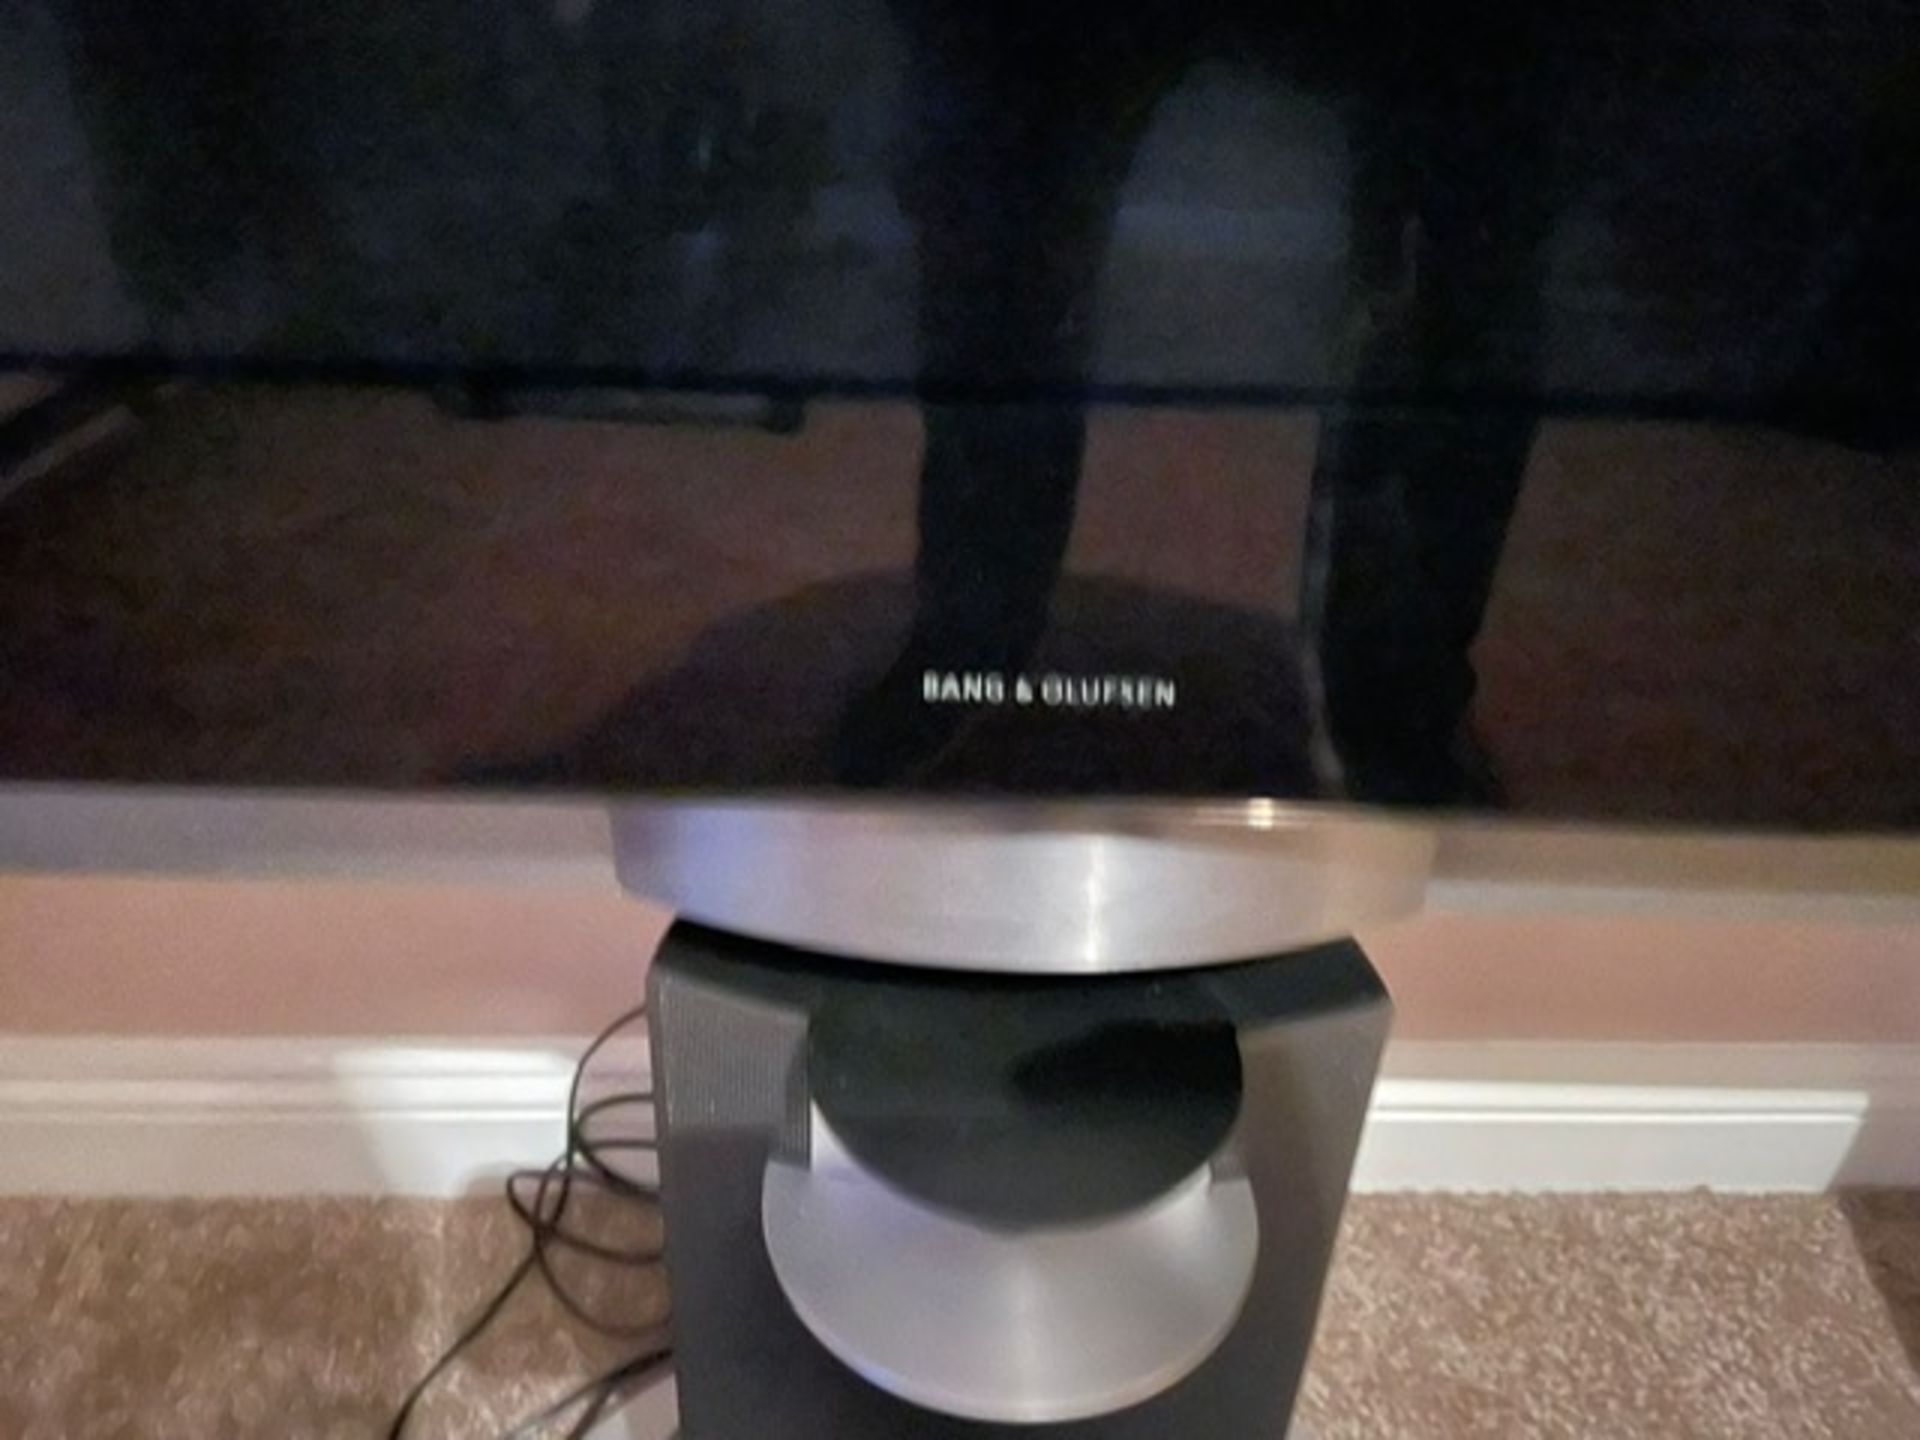 BANG & OLUFSEN TV & WIRELESS MUSIC SYSTEM- BEOLINK - Image 9 of 9